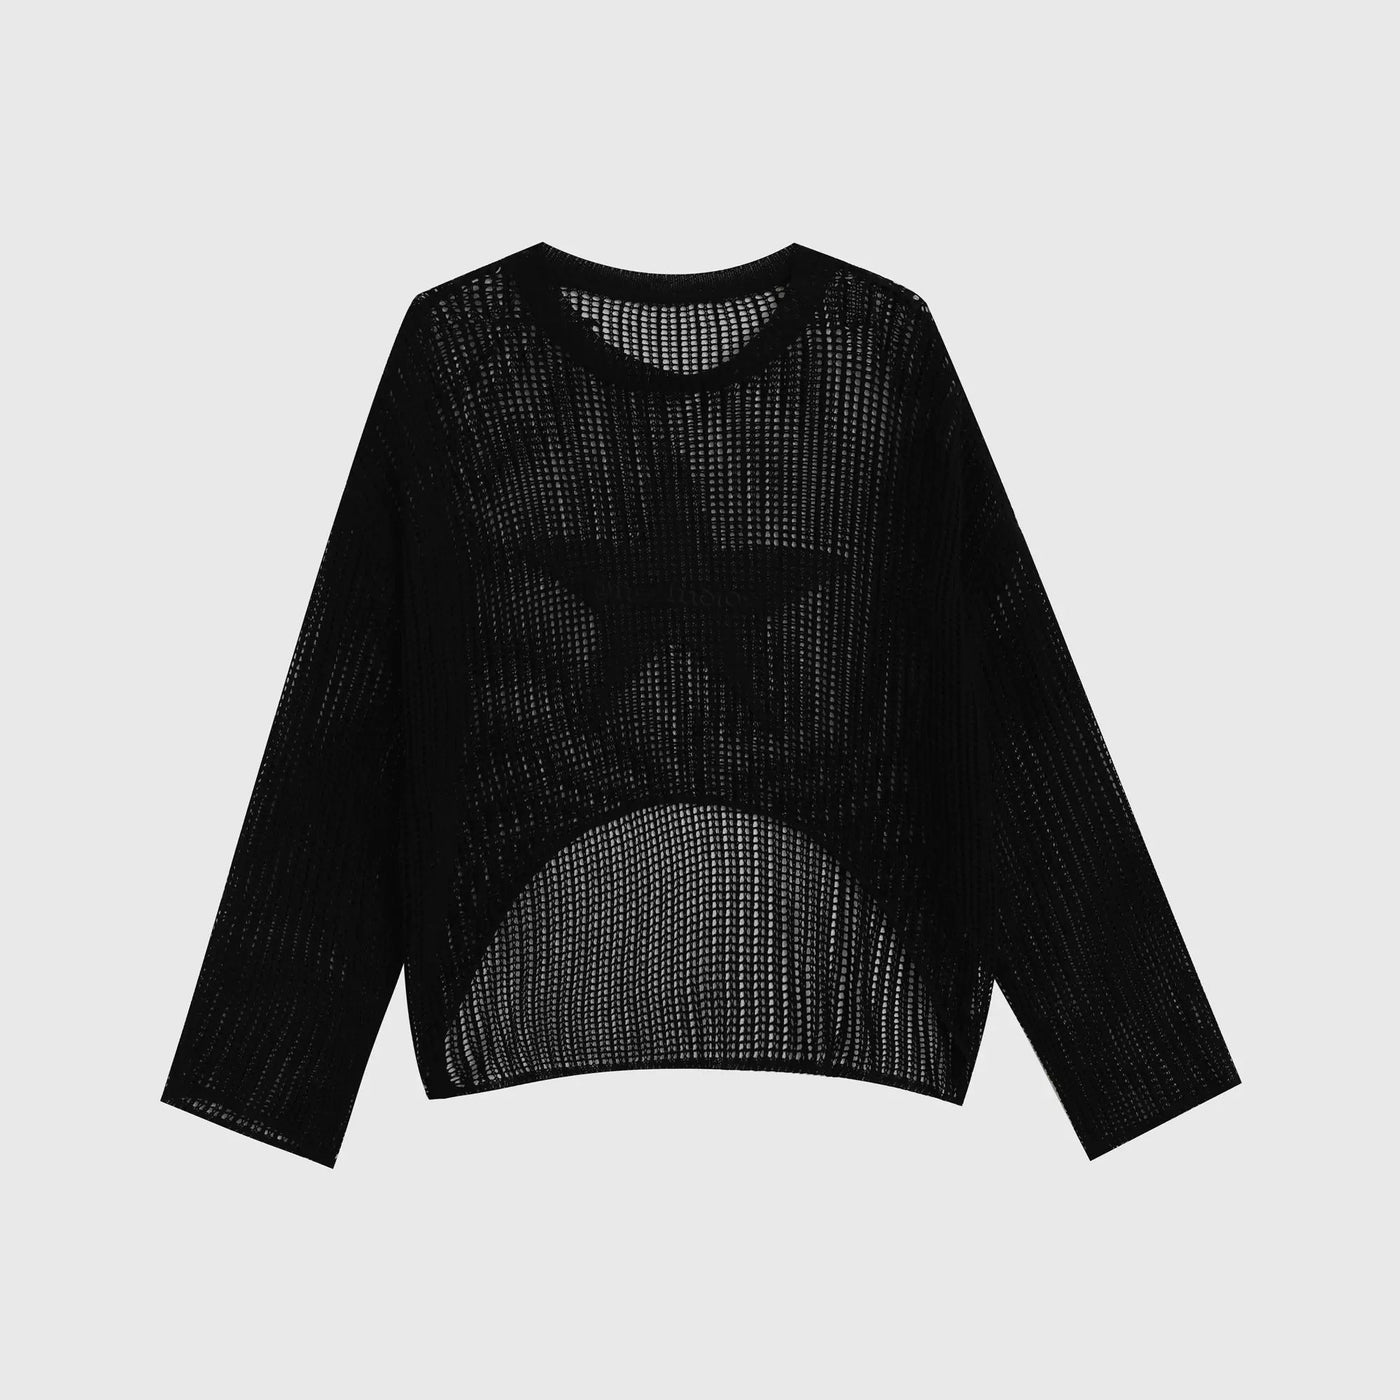 Star Shape Hollowed Sweater Korean Street Fashion Sweater By INS Korea Shop Online at OH Vault